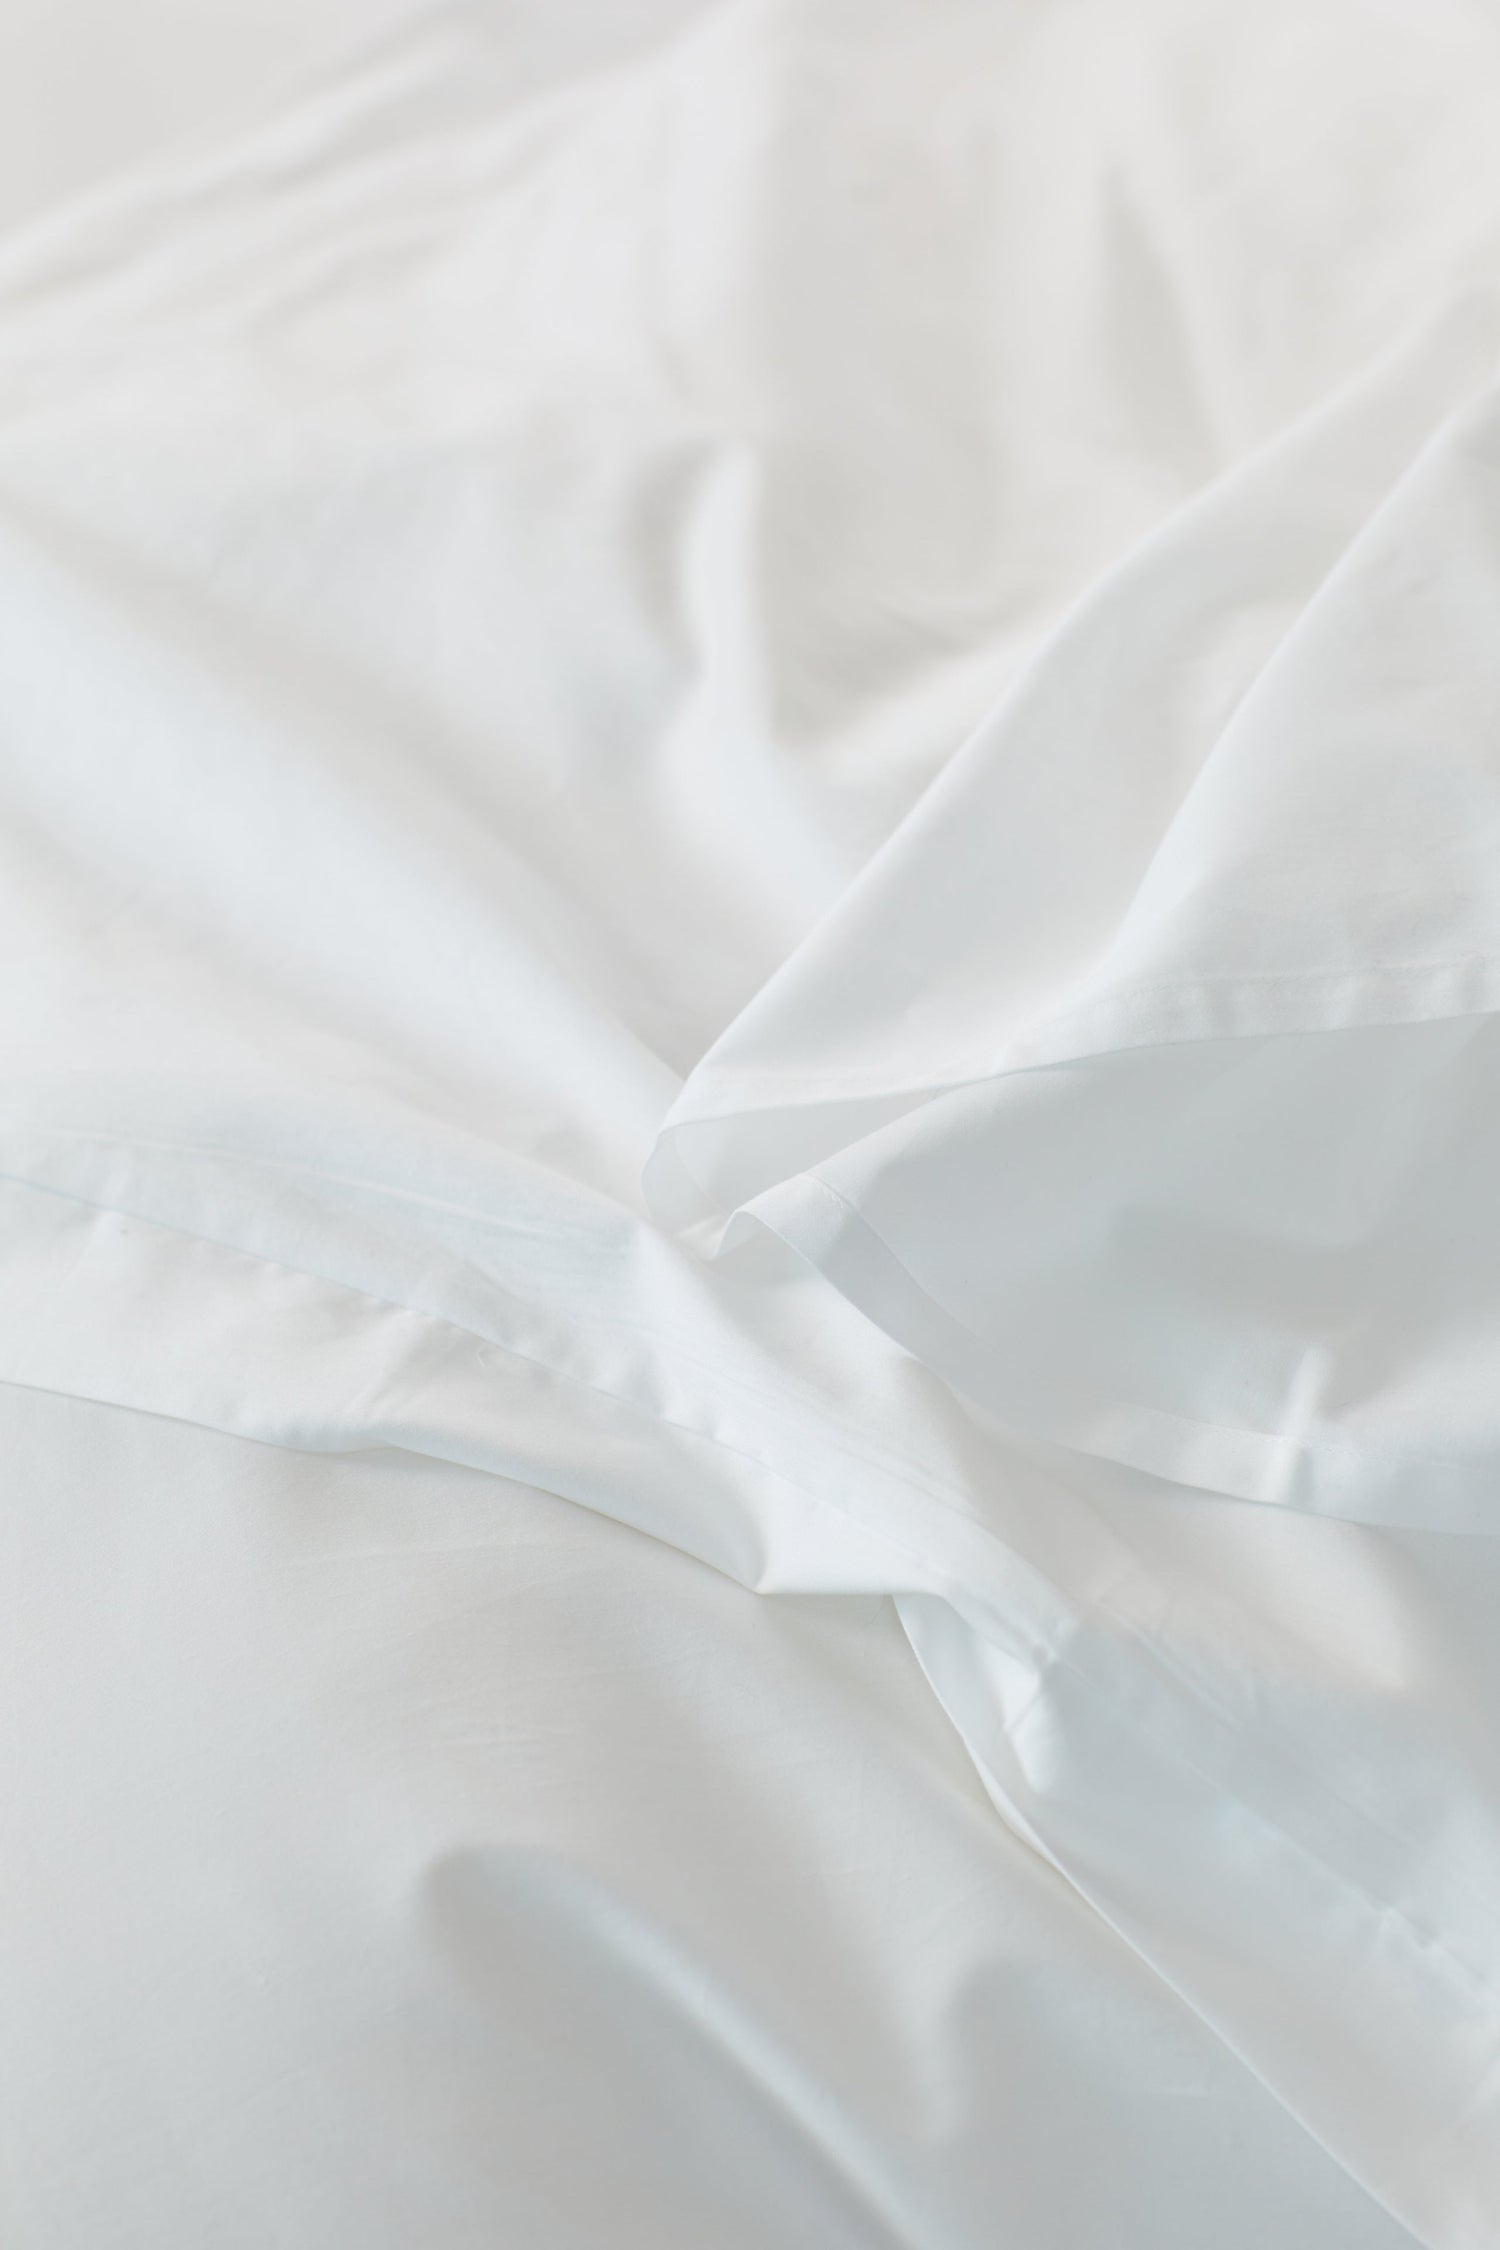 Flat Sheet - Washed Cotton Percale